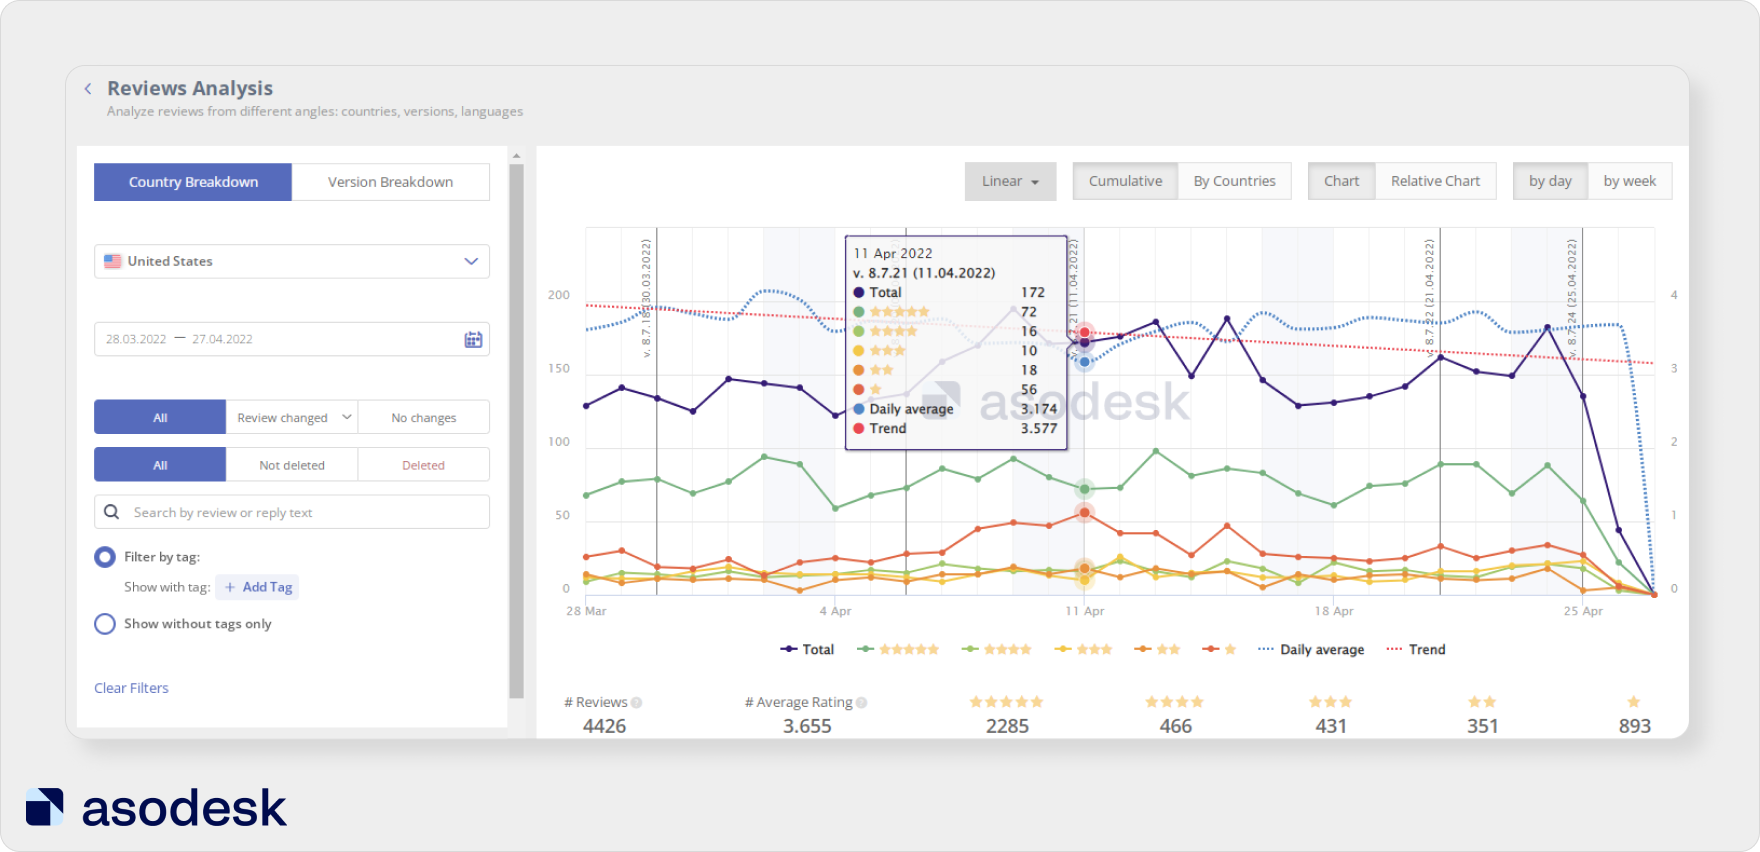 Reviews Analysis in Asodesk helps to evaluate how the reviews on app are changing